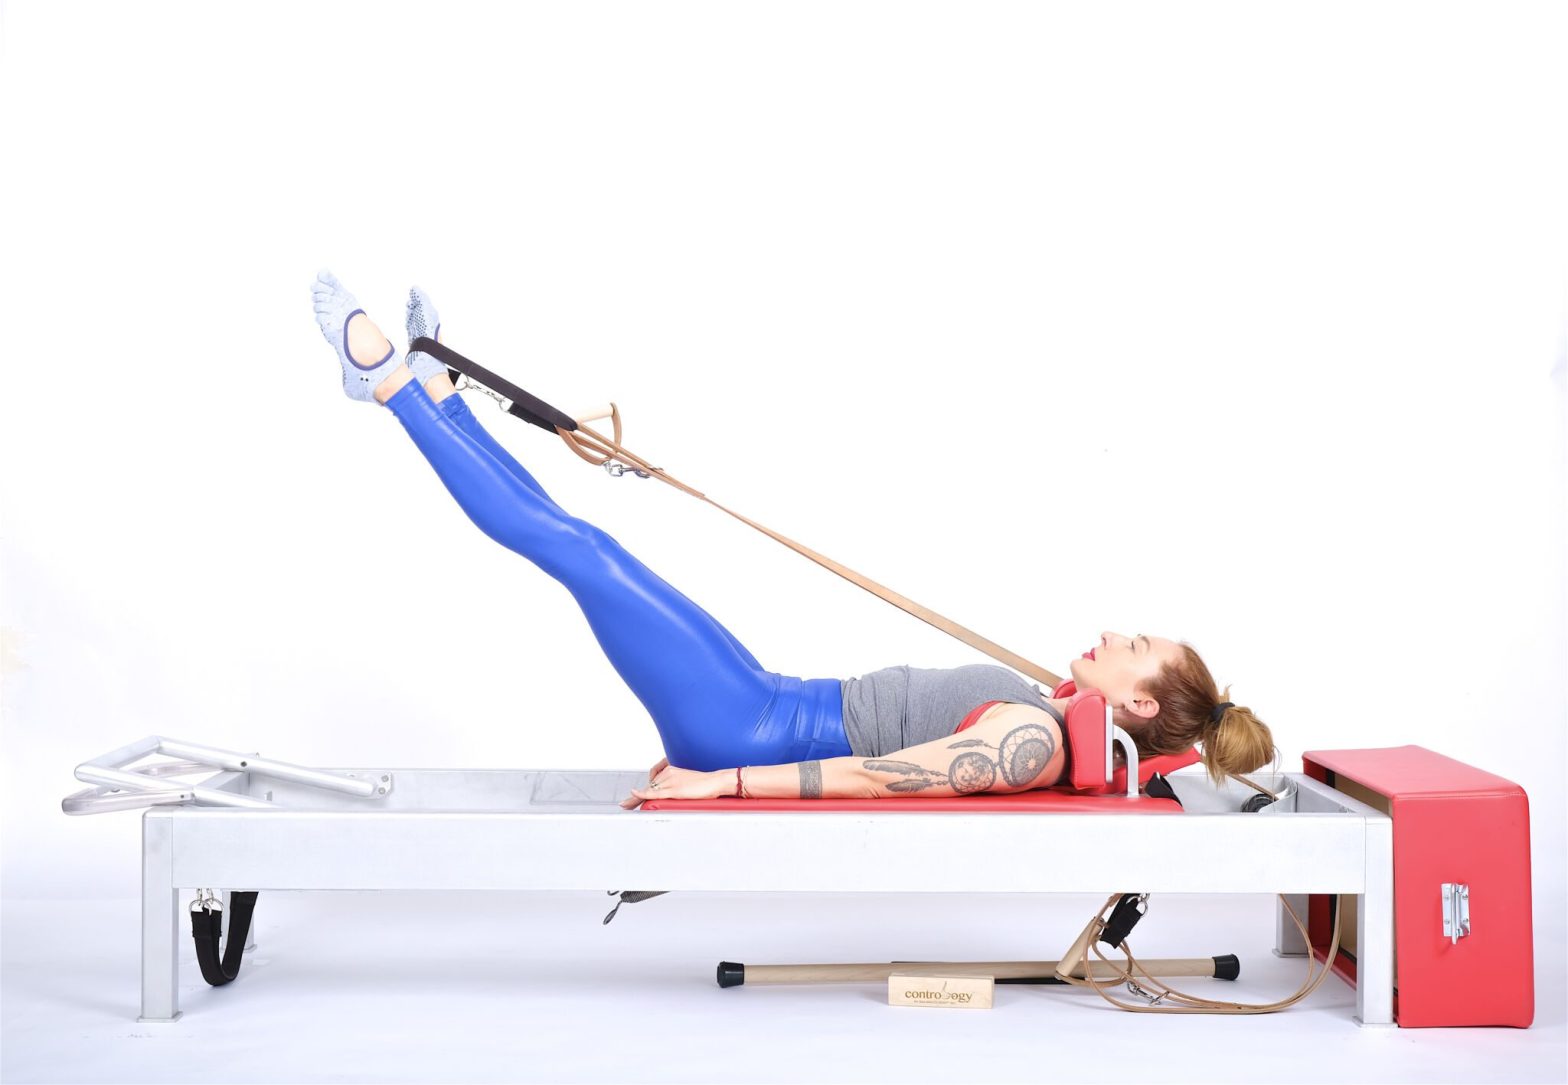 Snake and Twist Bar Up on the Reformer 2 - Online Pilates Classes